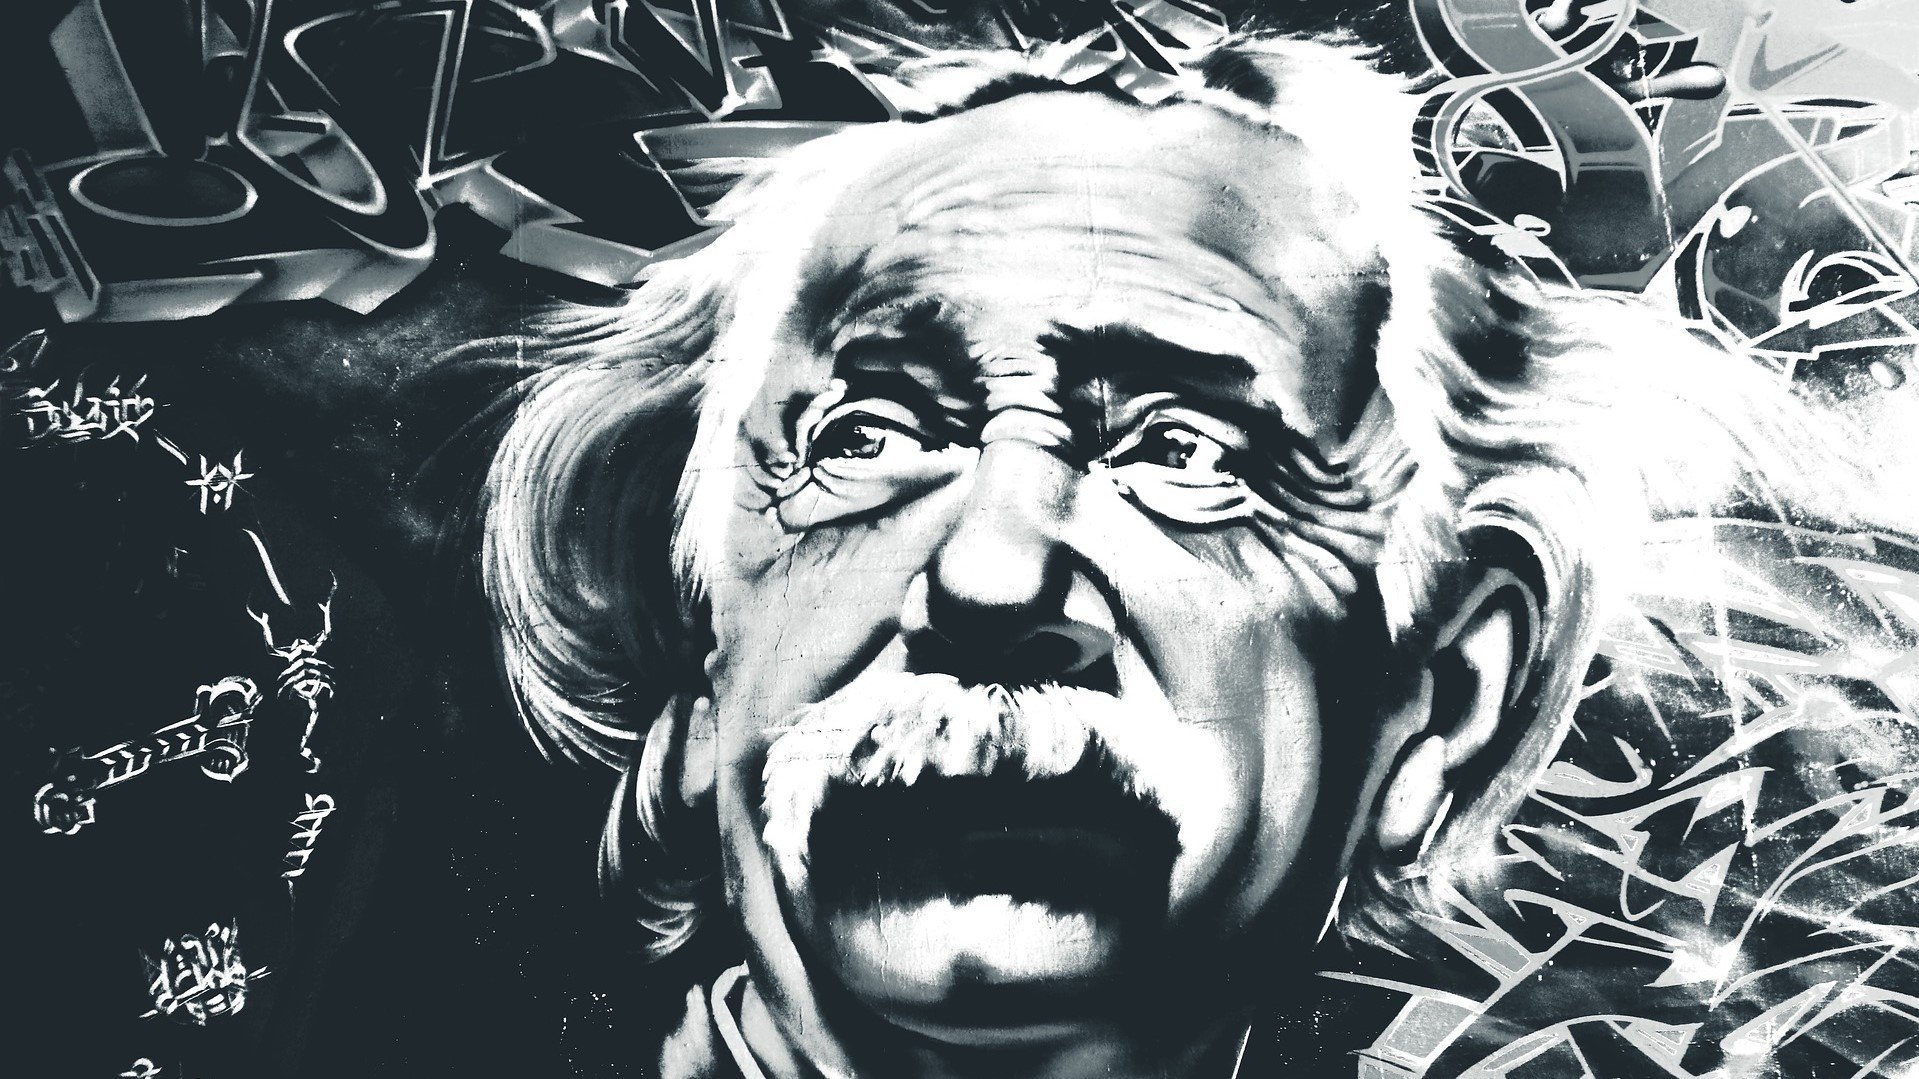 A mural of Einstein, who probably felt like a fraud from time to time.